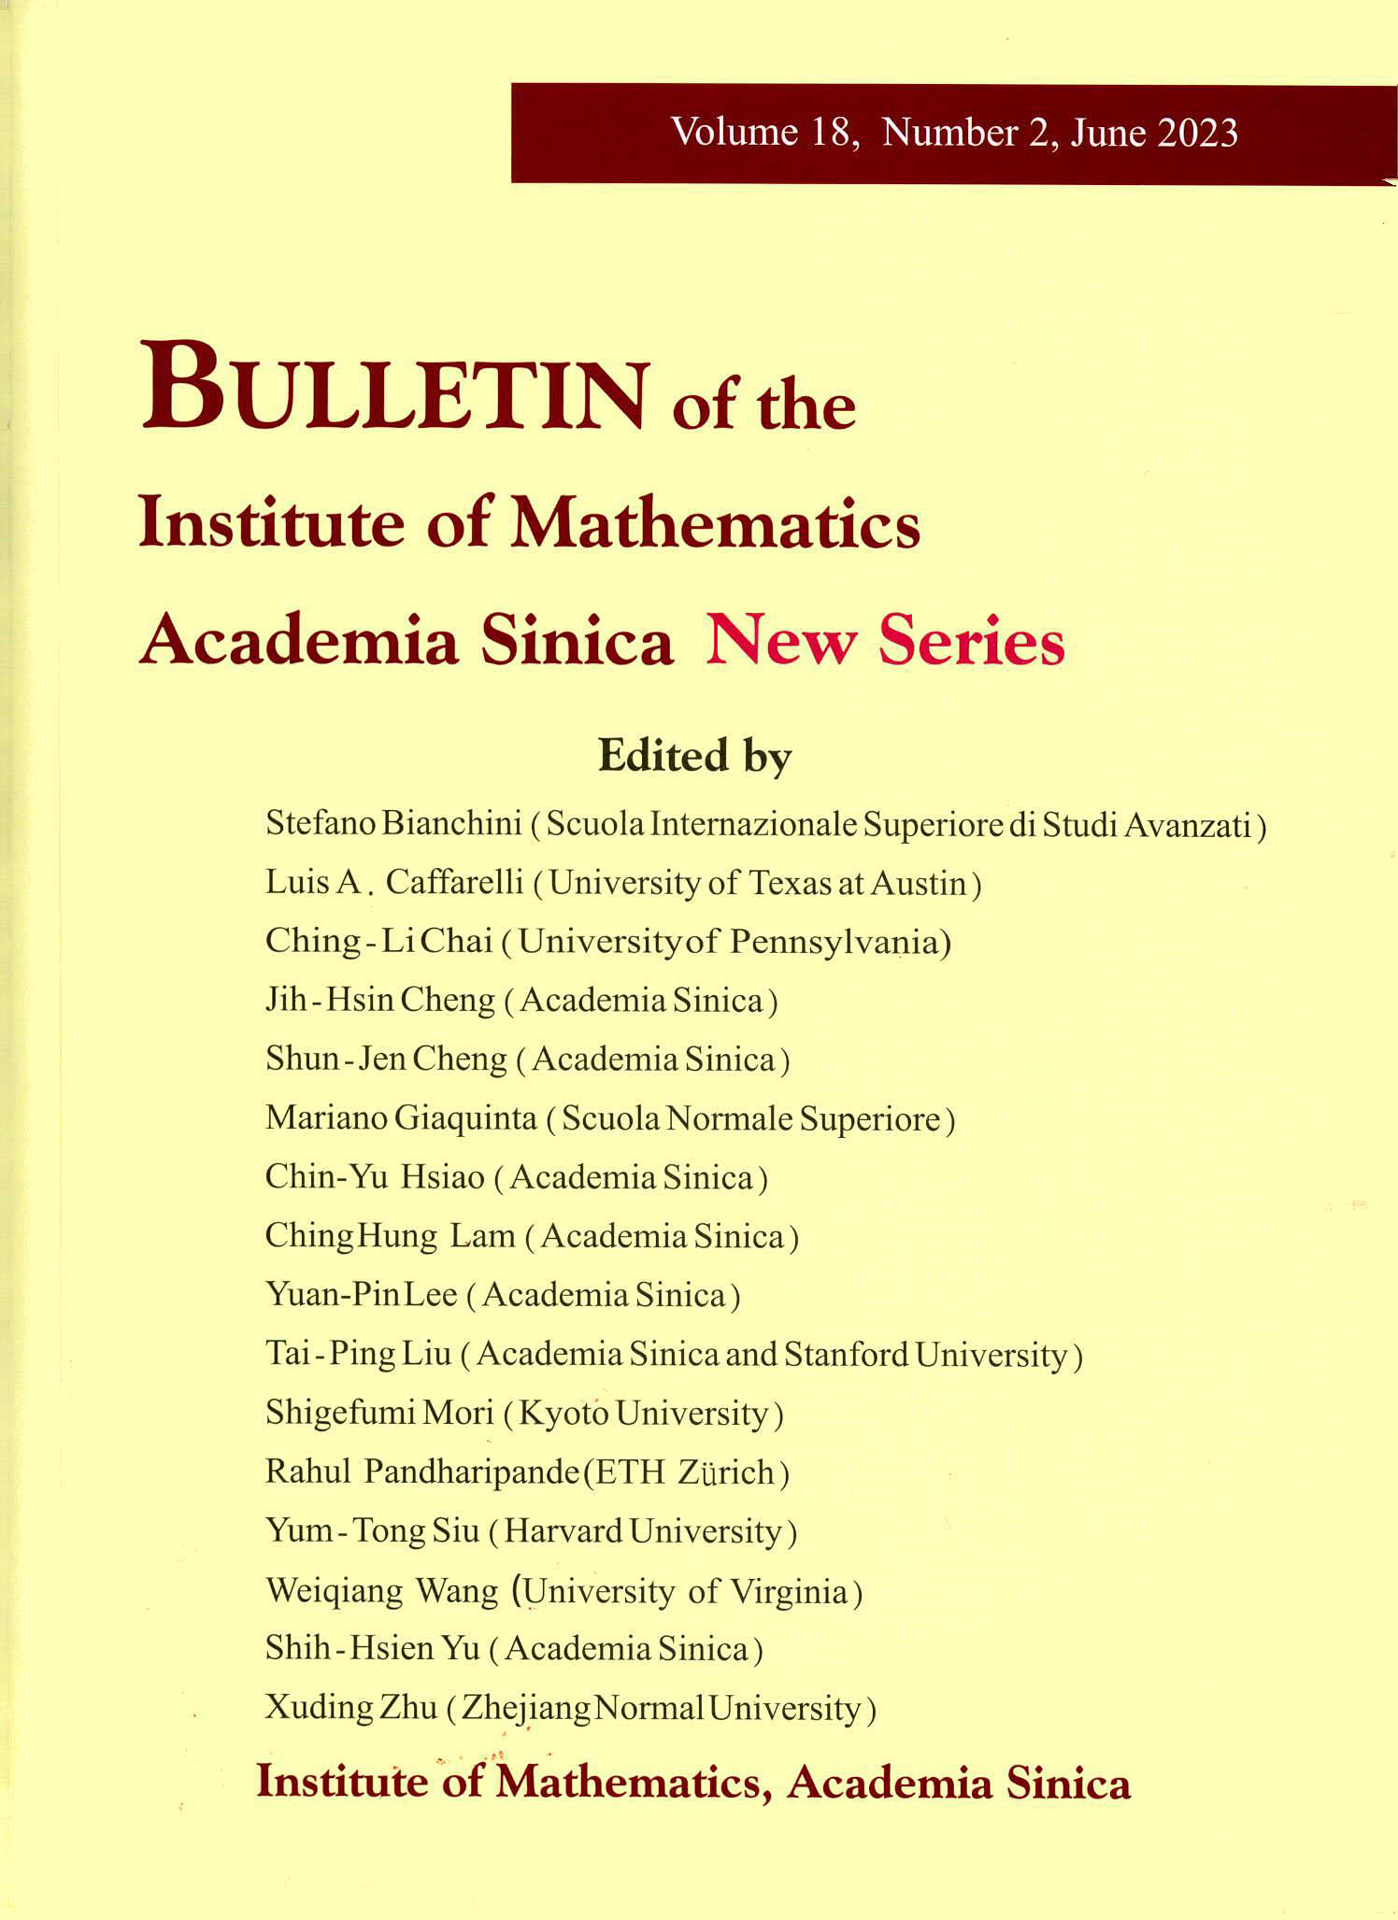 《Bulletin of the Institute of Mathematics Academia Sinica New Series》 Volume 18 Number 2 is now available